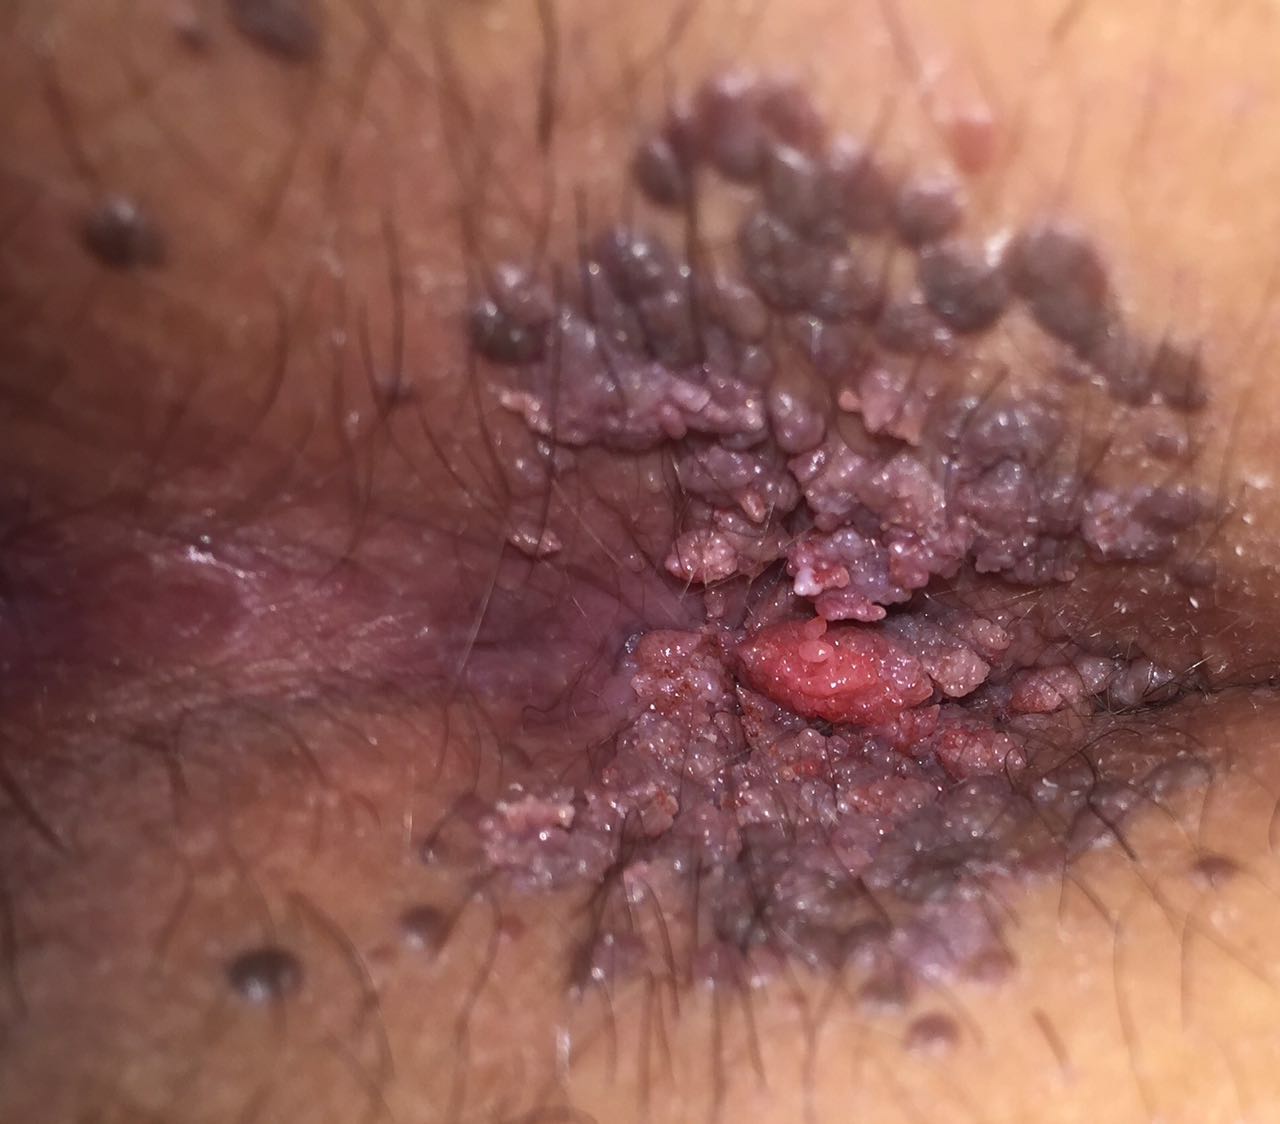 anal warts  befor treatment2 